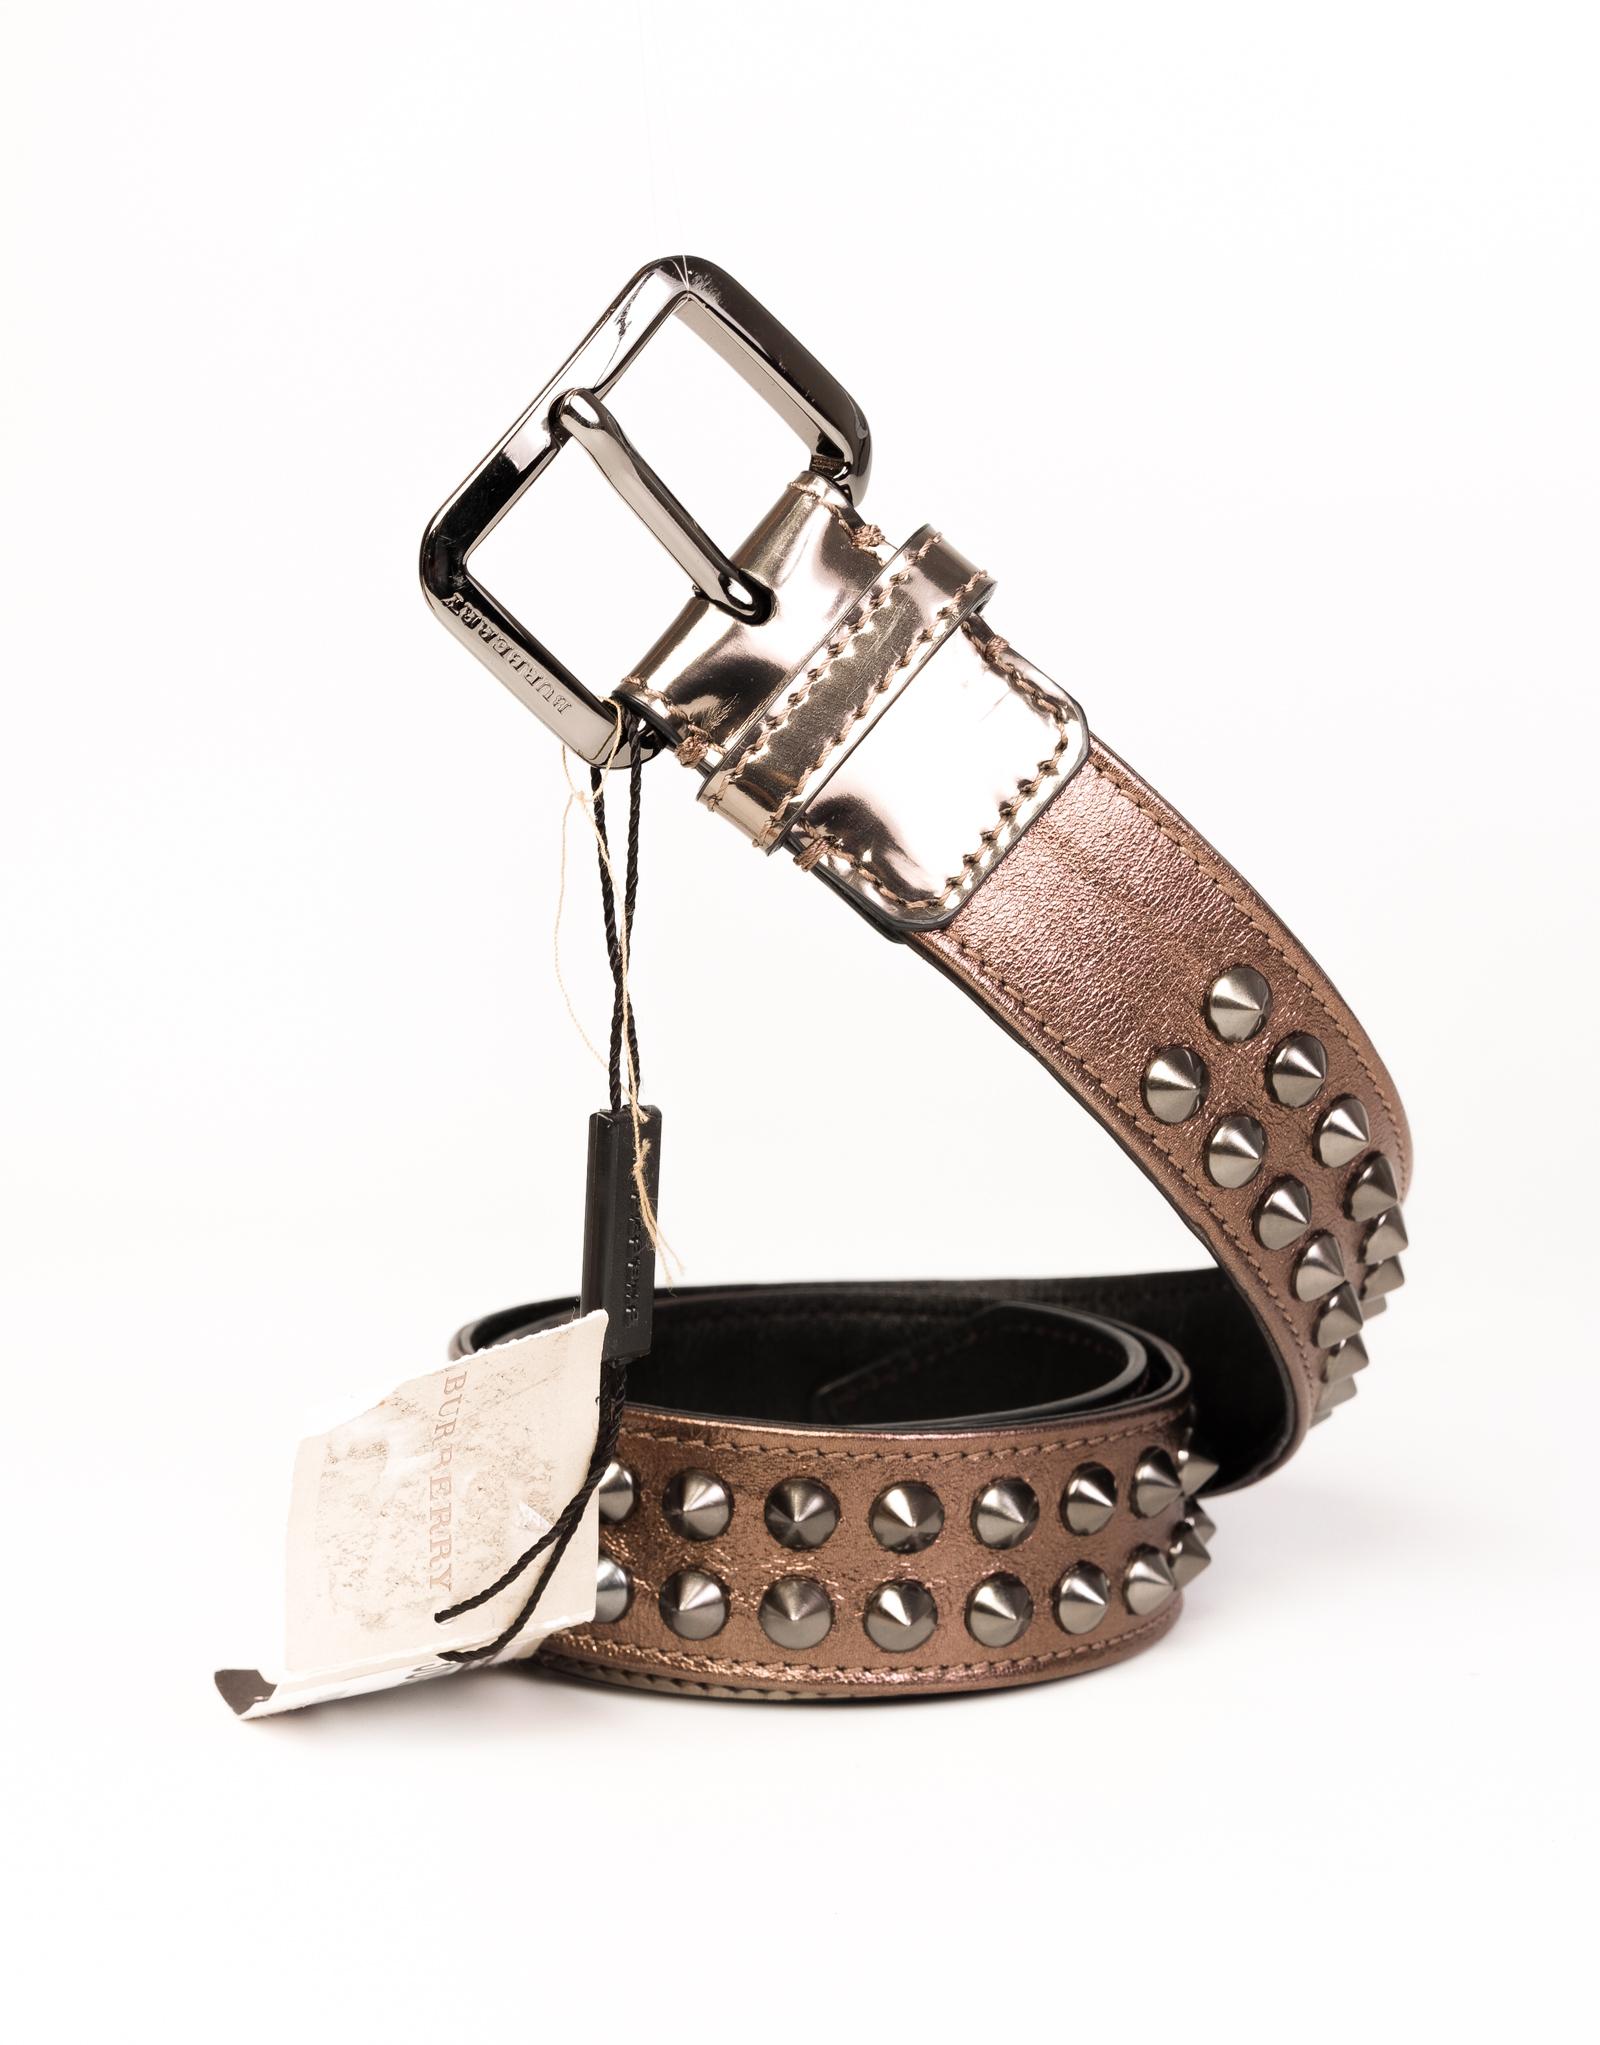 This belt by Burberry is made with dark nickel leather and features silver tone studs and buckle.

COLOR: Dark Nickel
MATERIAL: Leather
ITEM CODE: ITGIOLIN4FIR
MEASURES: L 44” W 1.5”
SIZE: 40/100
EST. RETAIL: $600
CONDITION: Brand new with